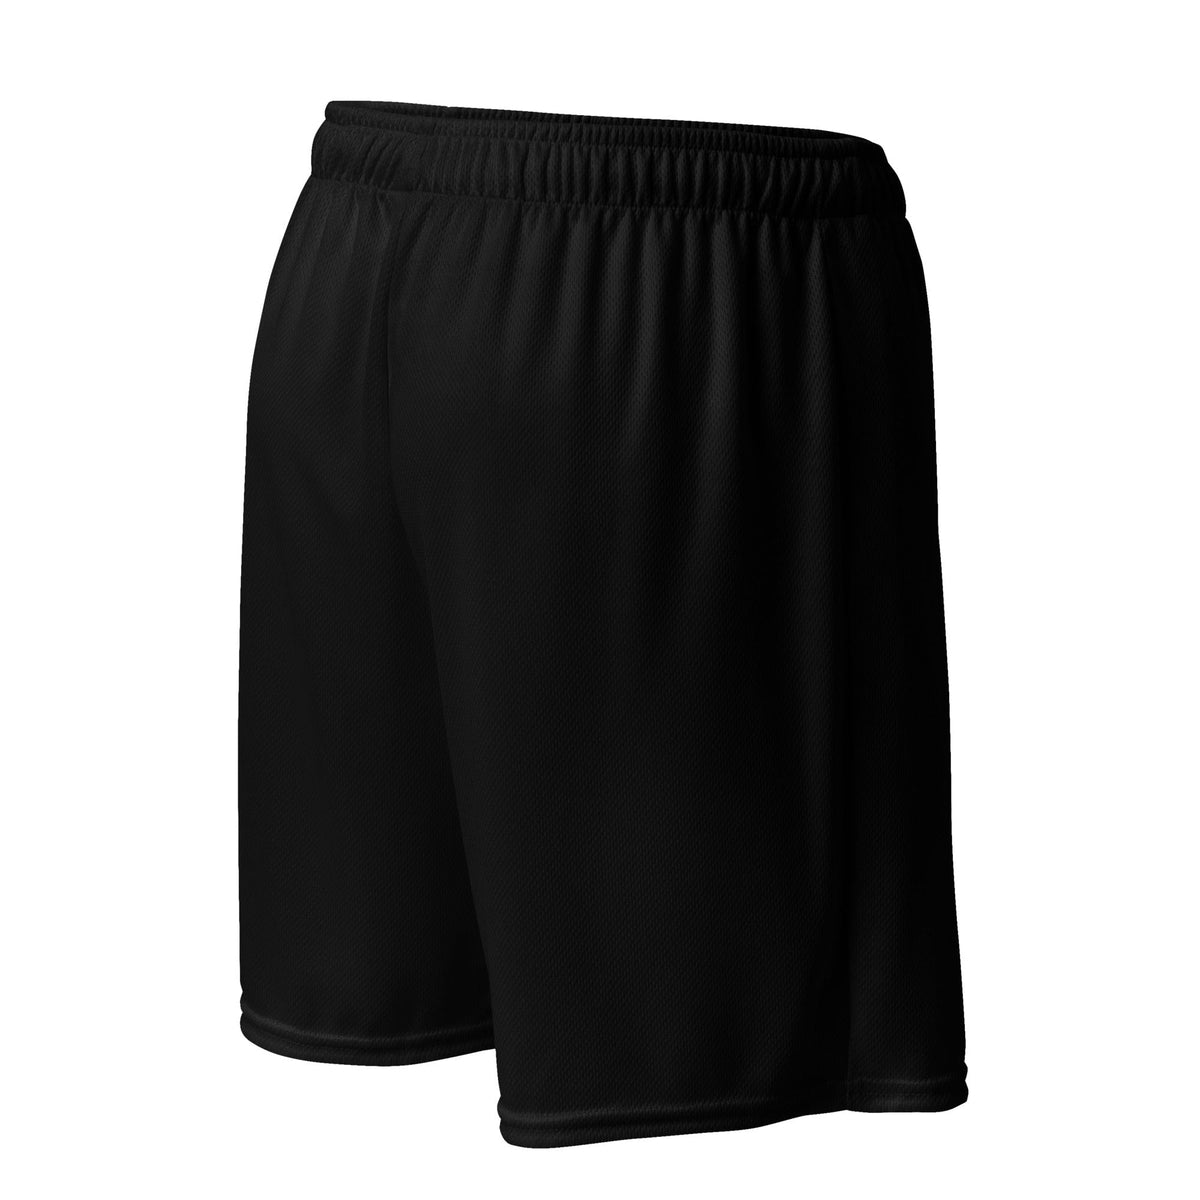 Hantsu Active shorts for gym and other sports Hanz Driven